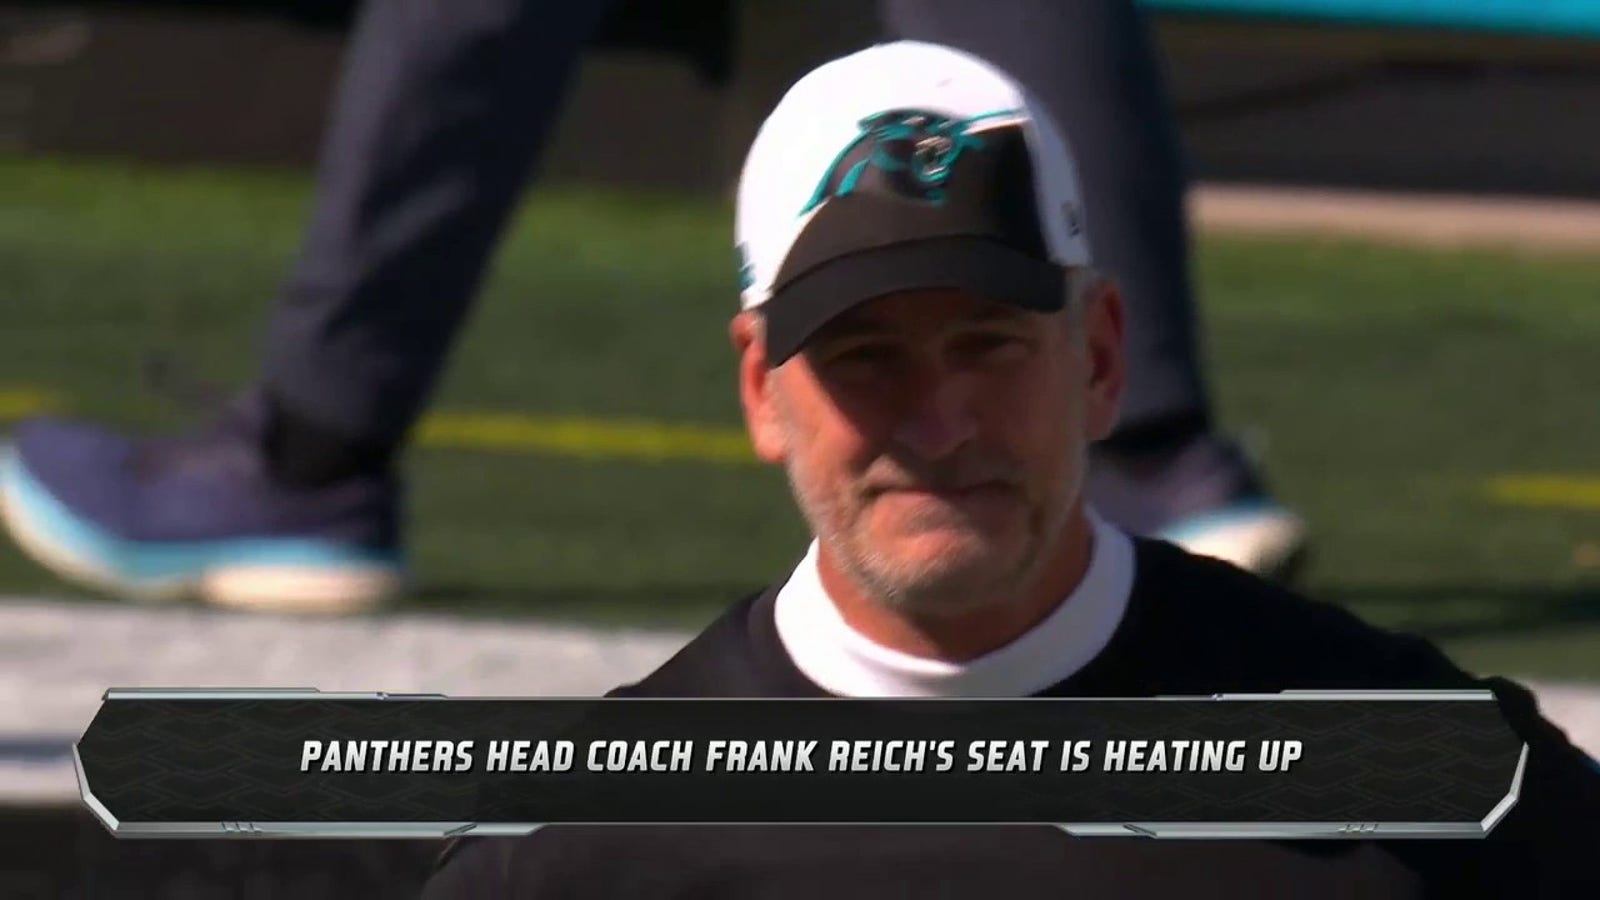 Jay Glazer: "Frank Reich has the hottest seat in the league"